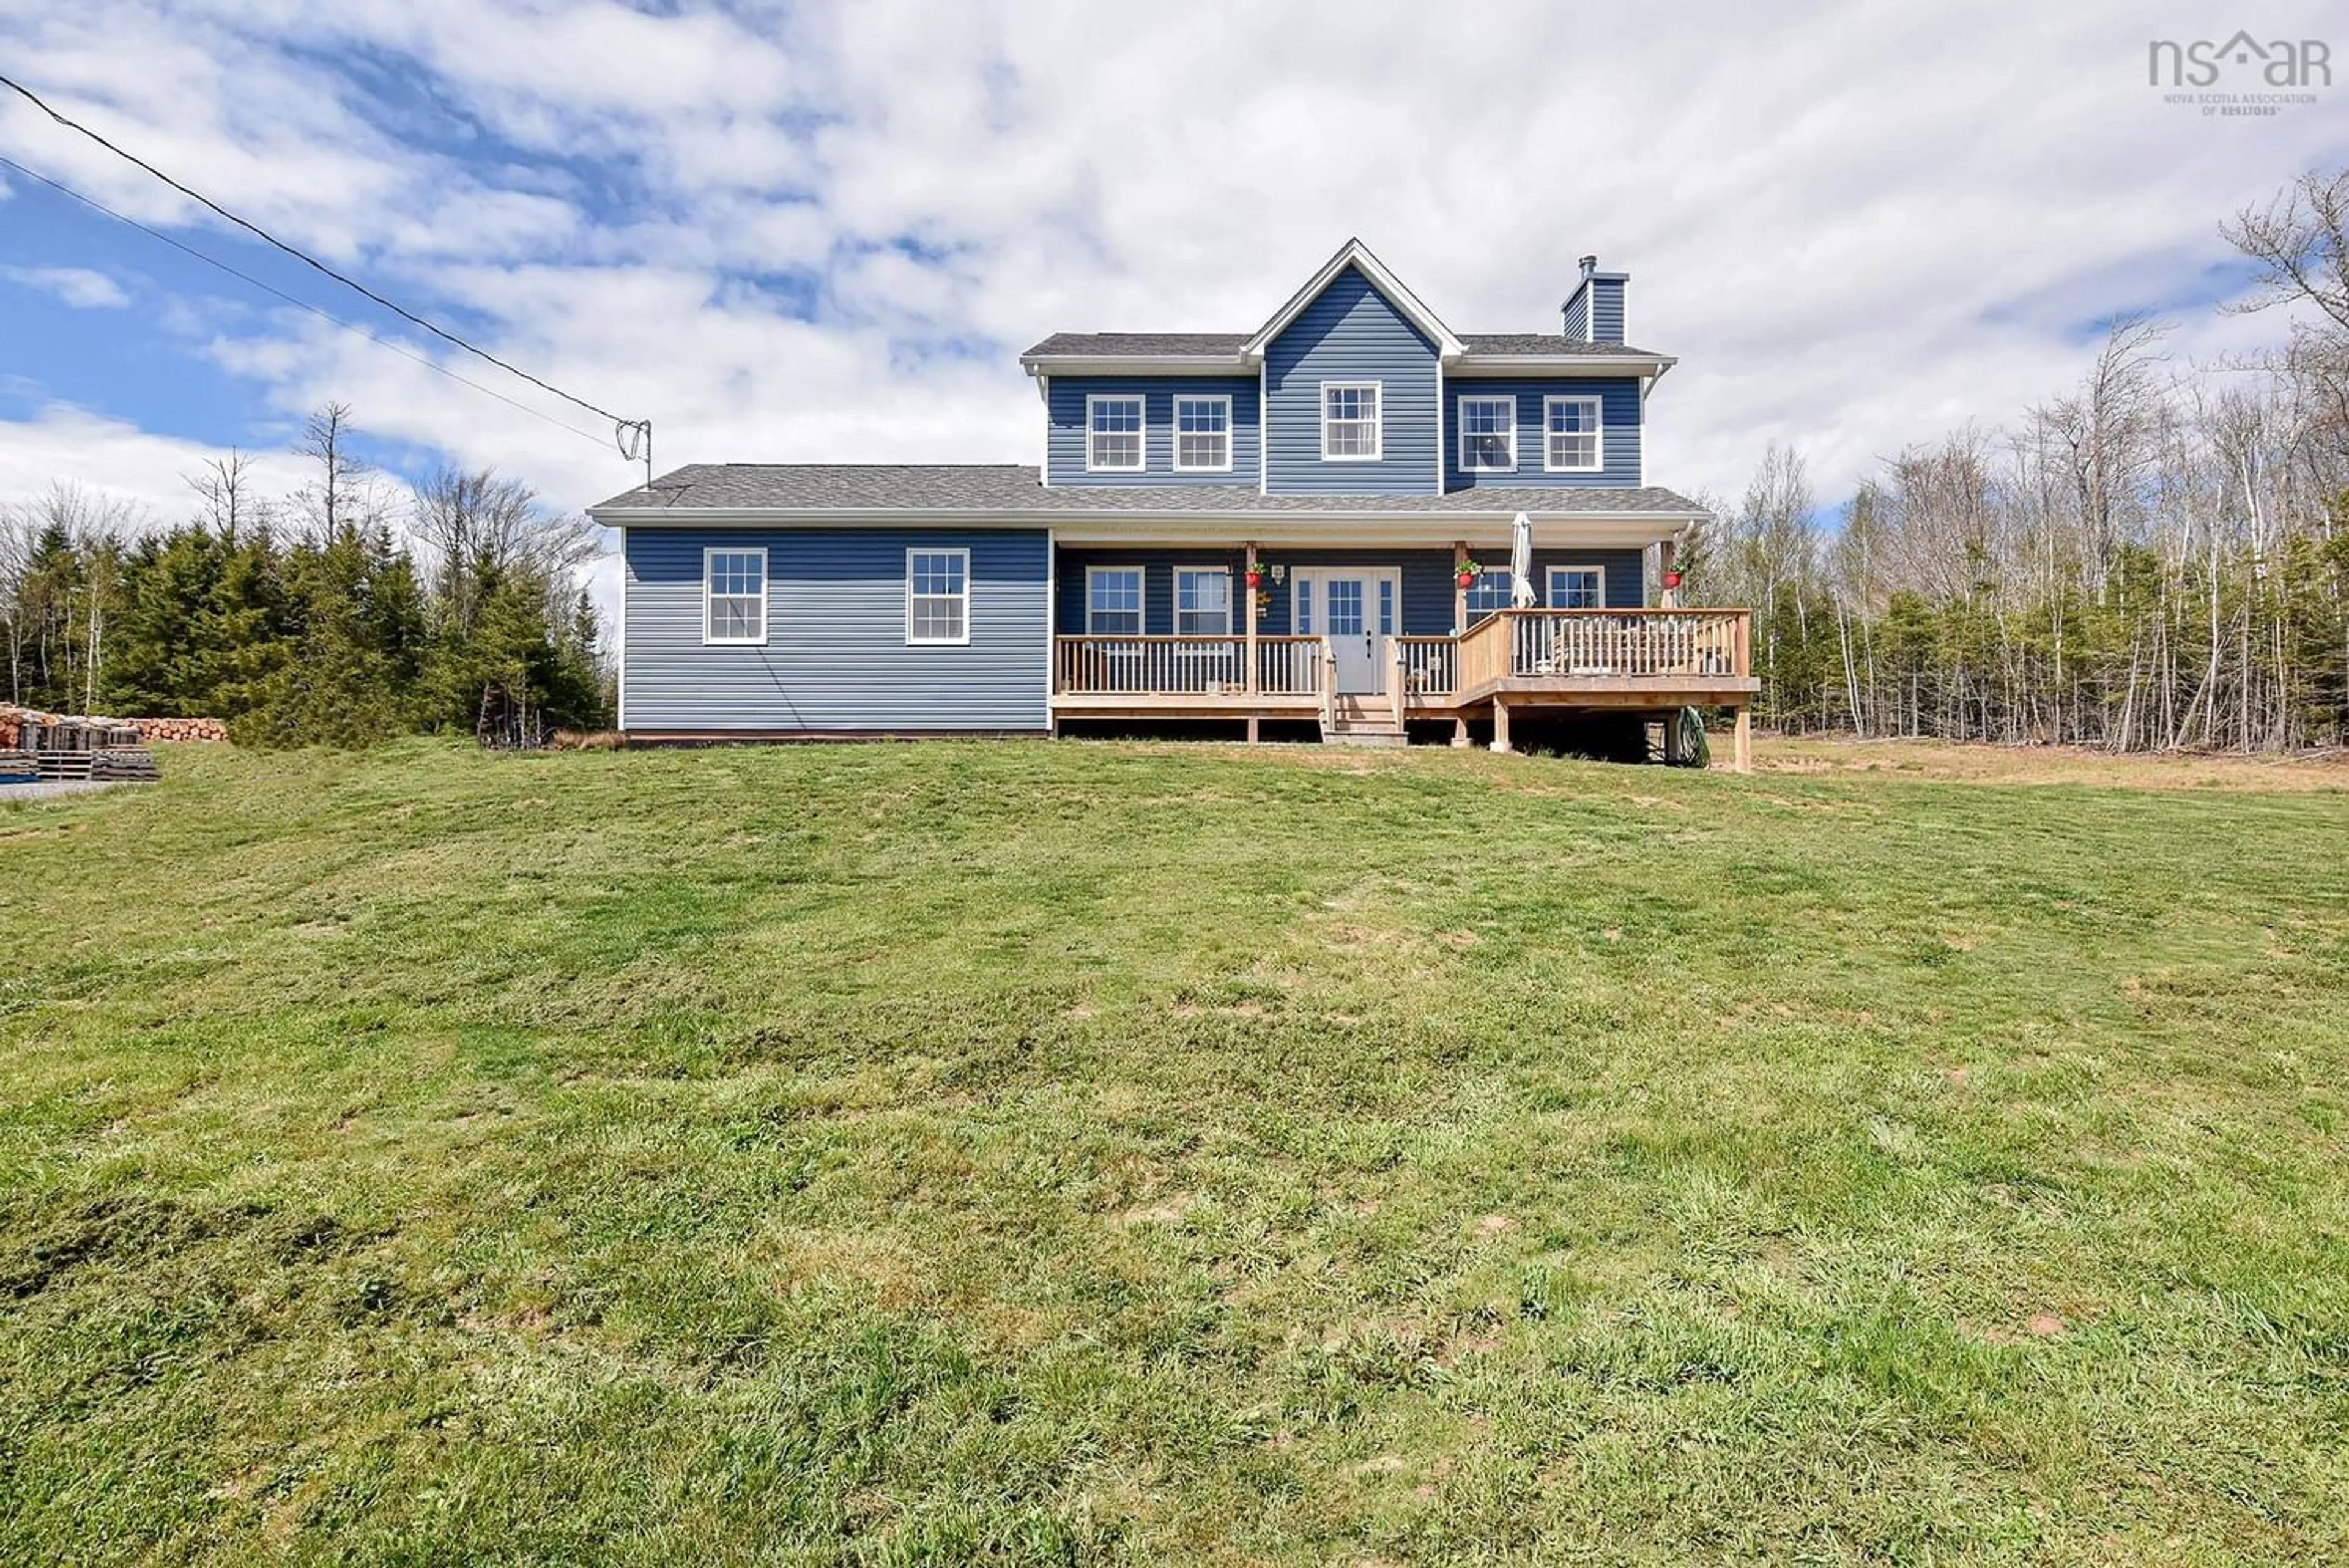 Home with unknown exterior material for 9409 Highway 215, Pembroke Nova Scotia B0N 2R0